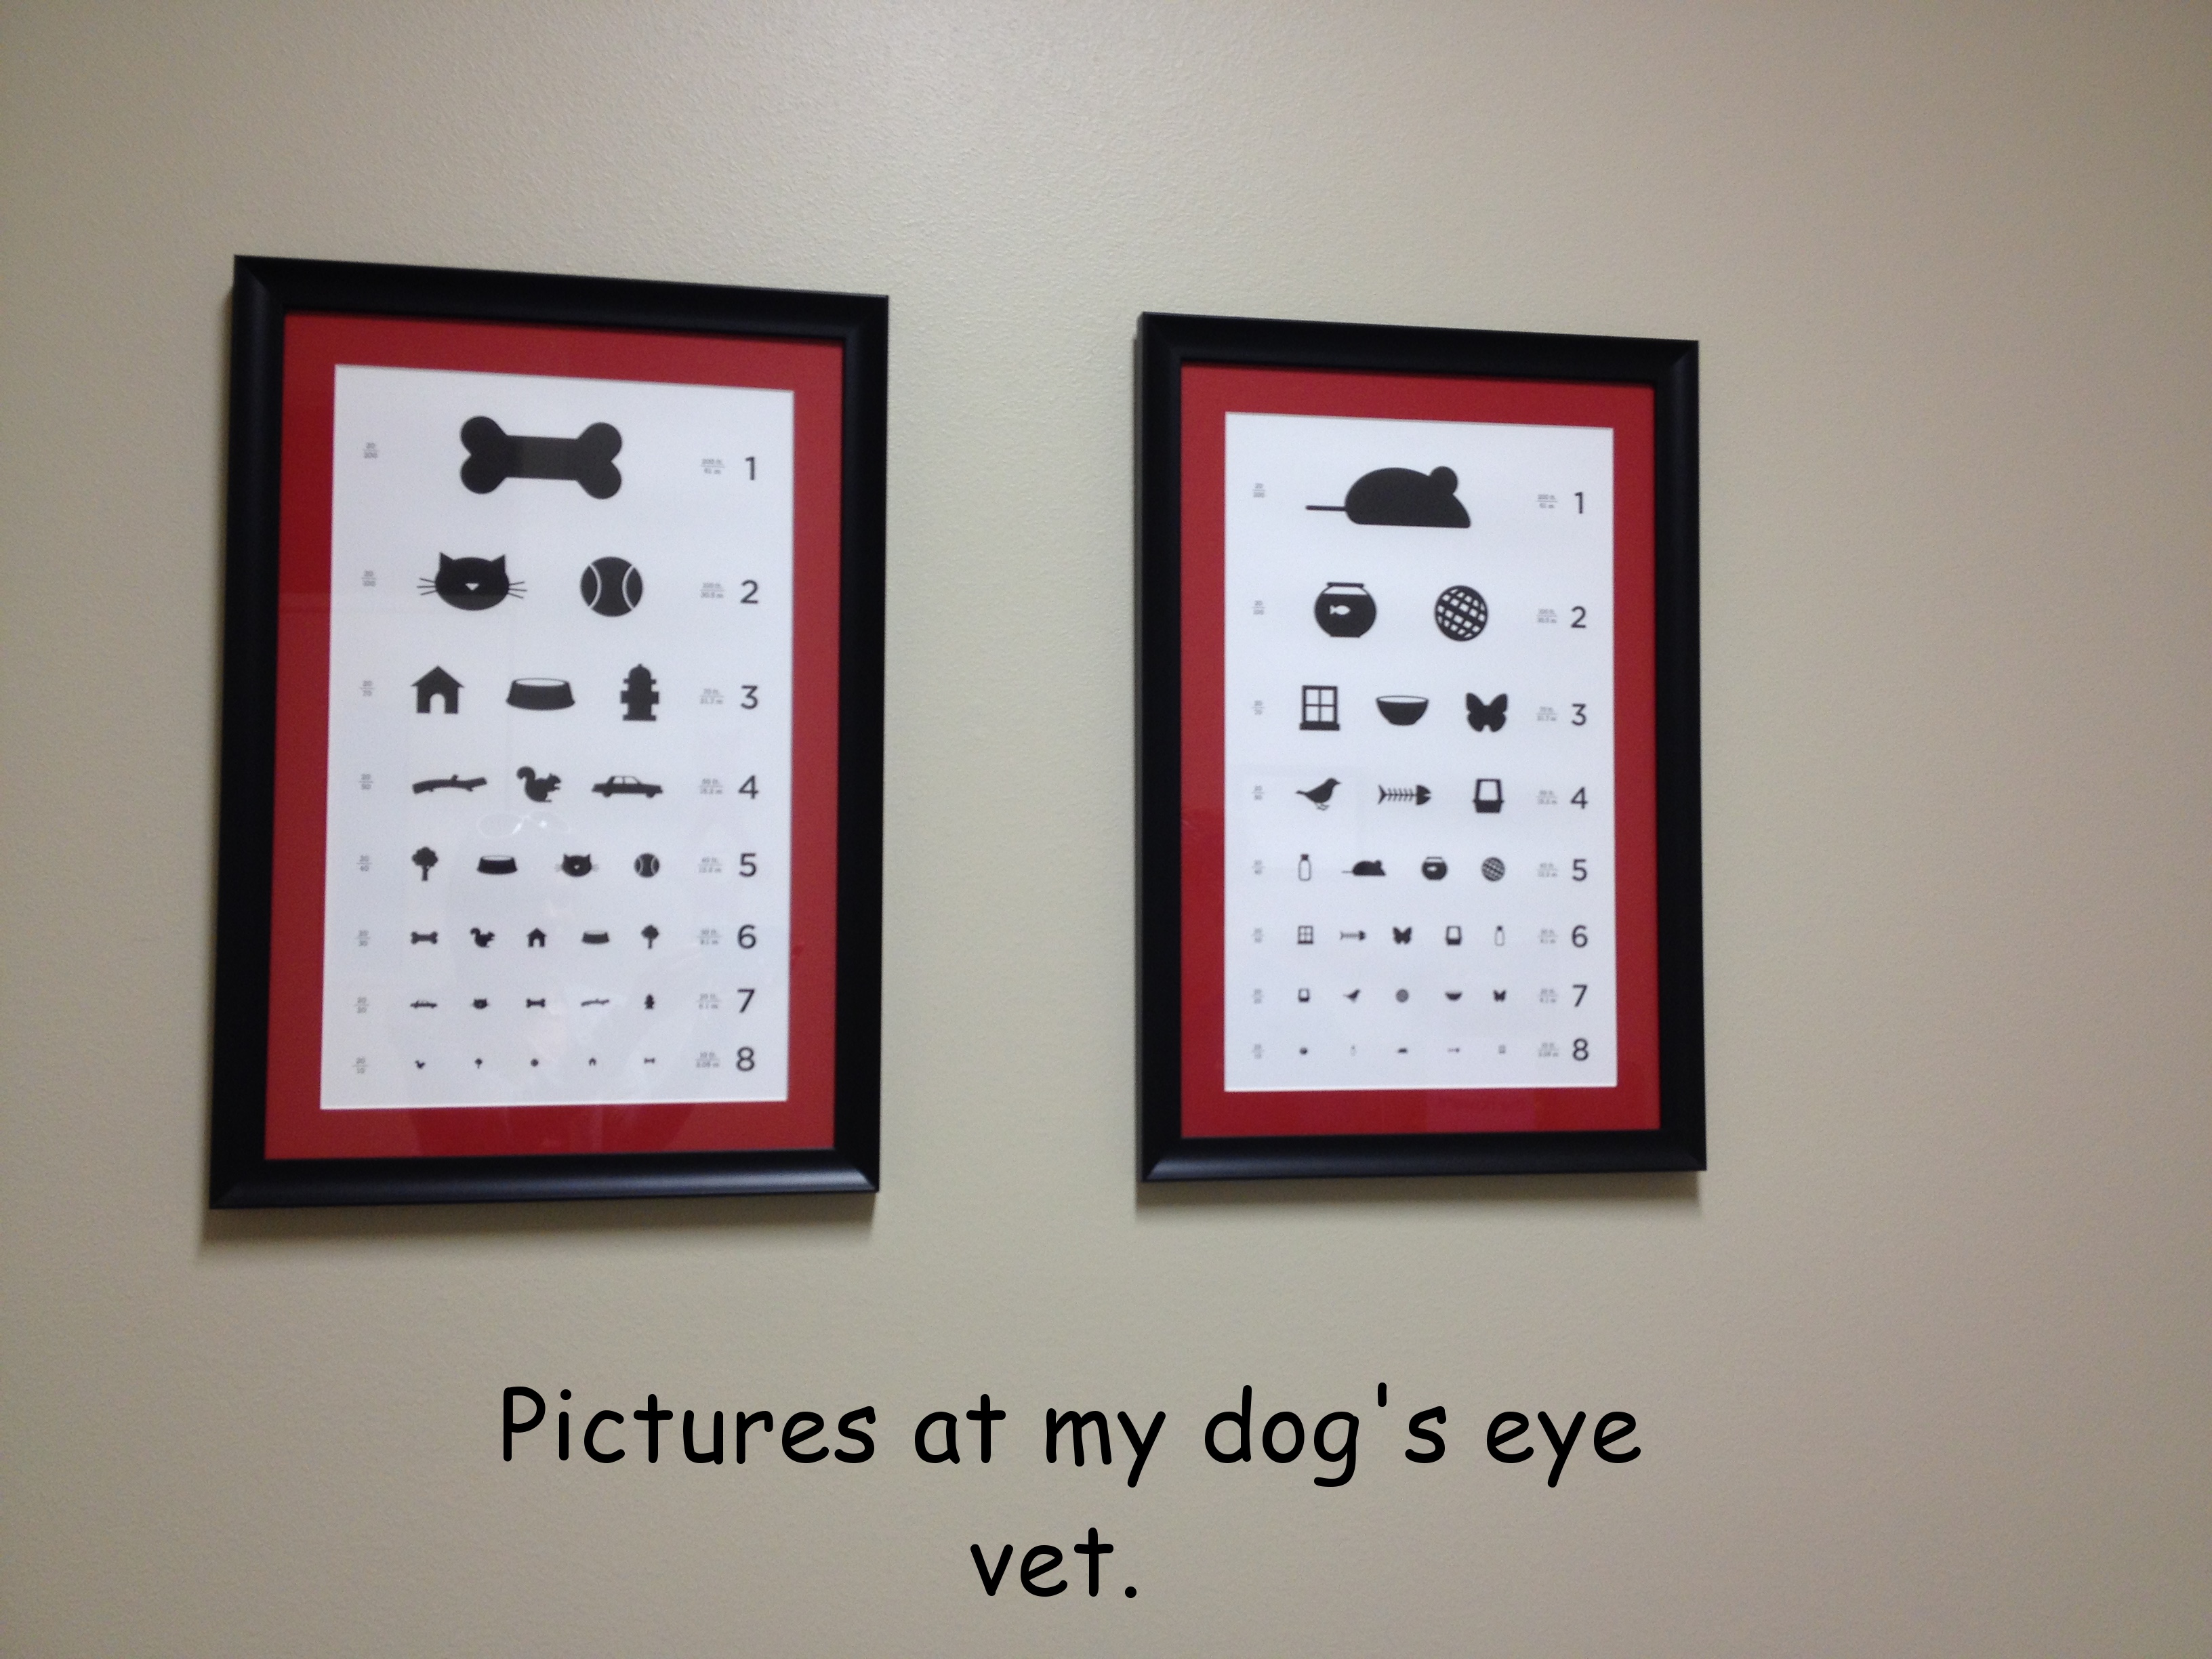 Seeing this in your dog's vet